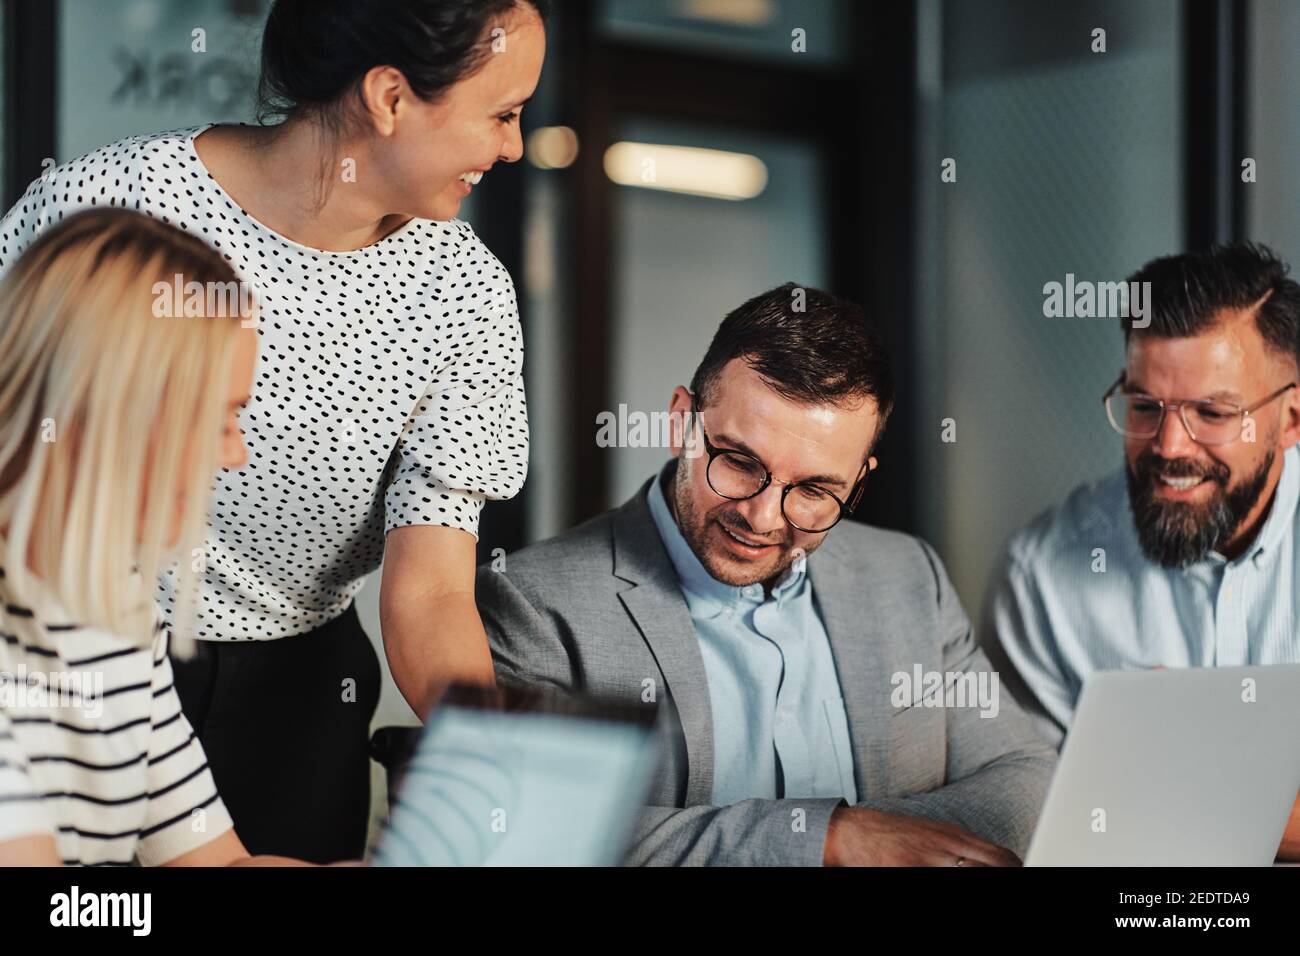 Smiling group of businesspeople working together on a laptop and discussing paperwork at a boardroom table in an office Stock Photo